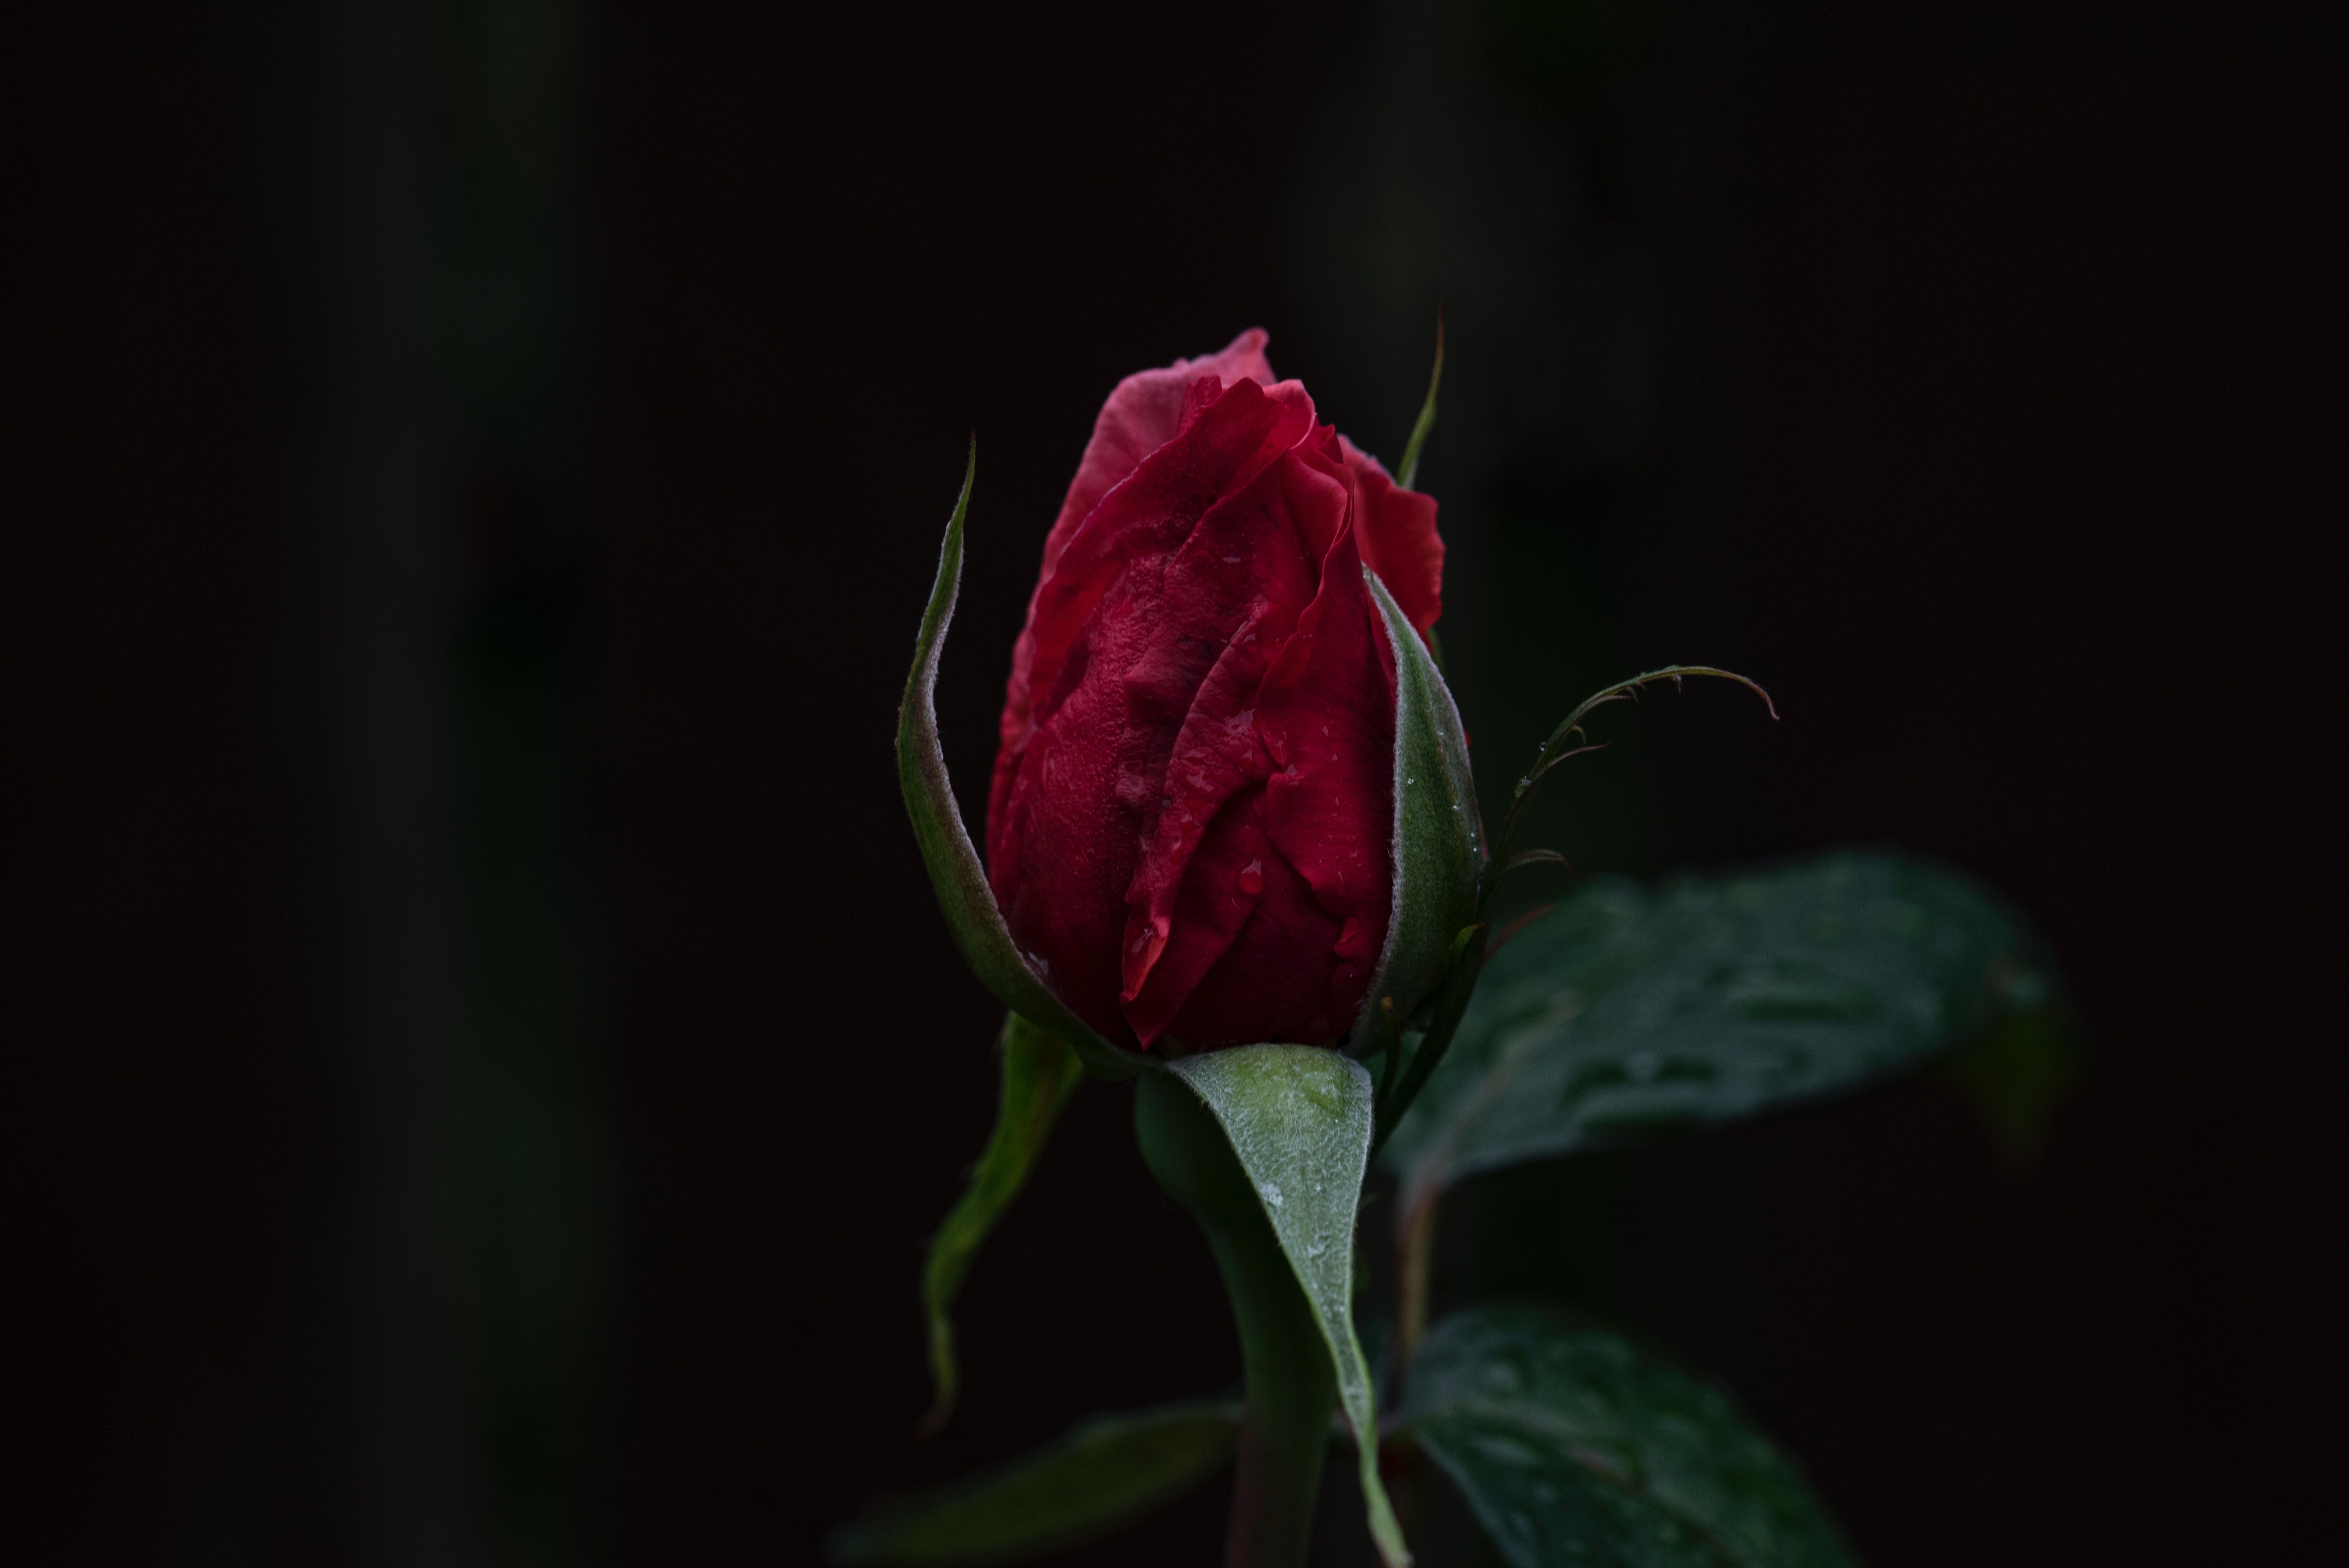 Wet Rose Picture. Download Free Image